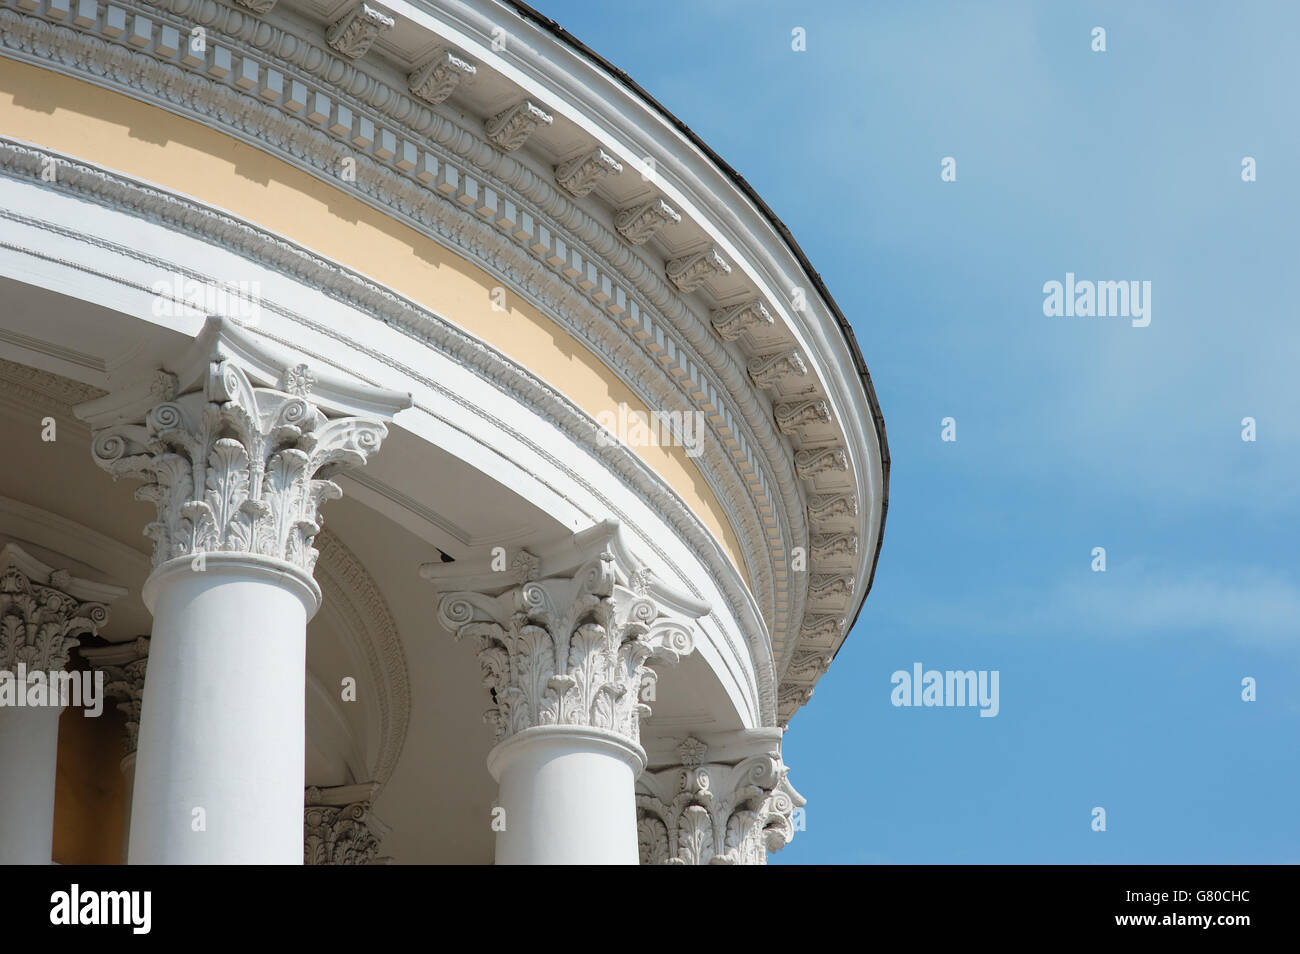 architectural columns on old historical facade Stock Photo